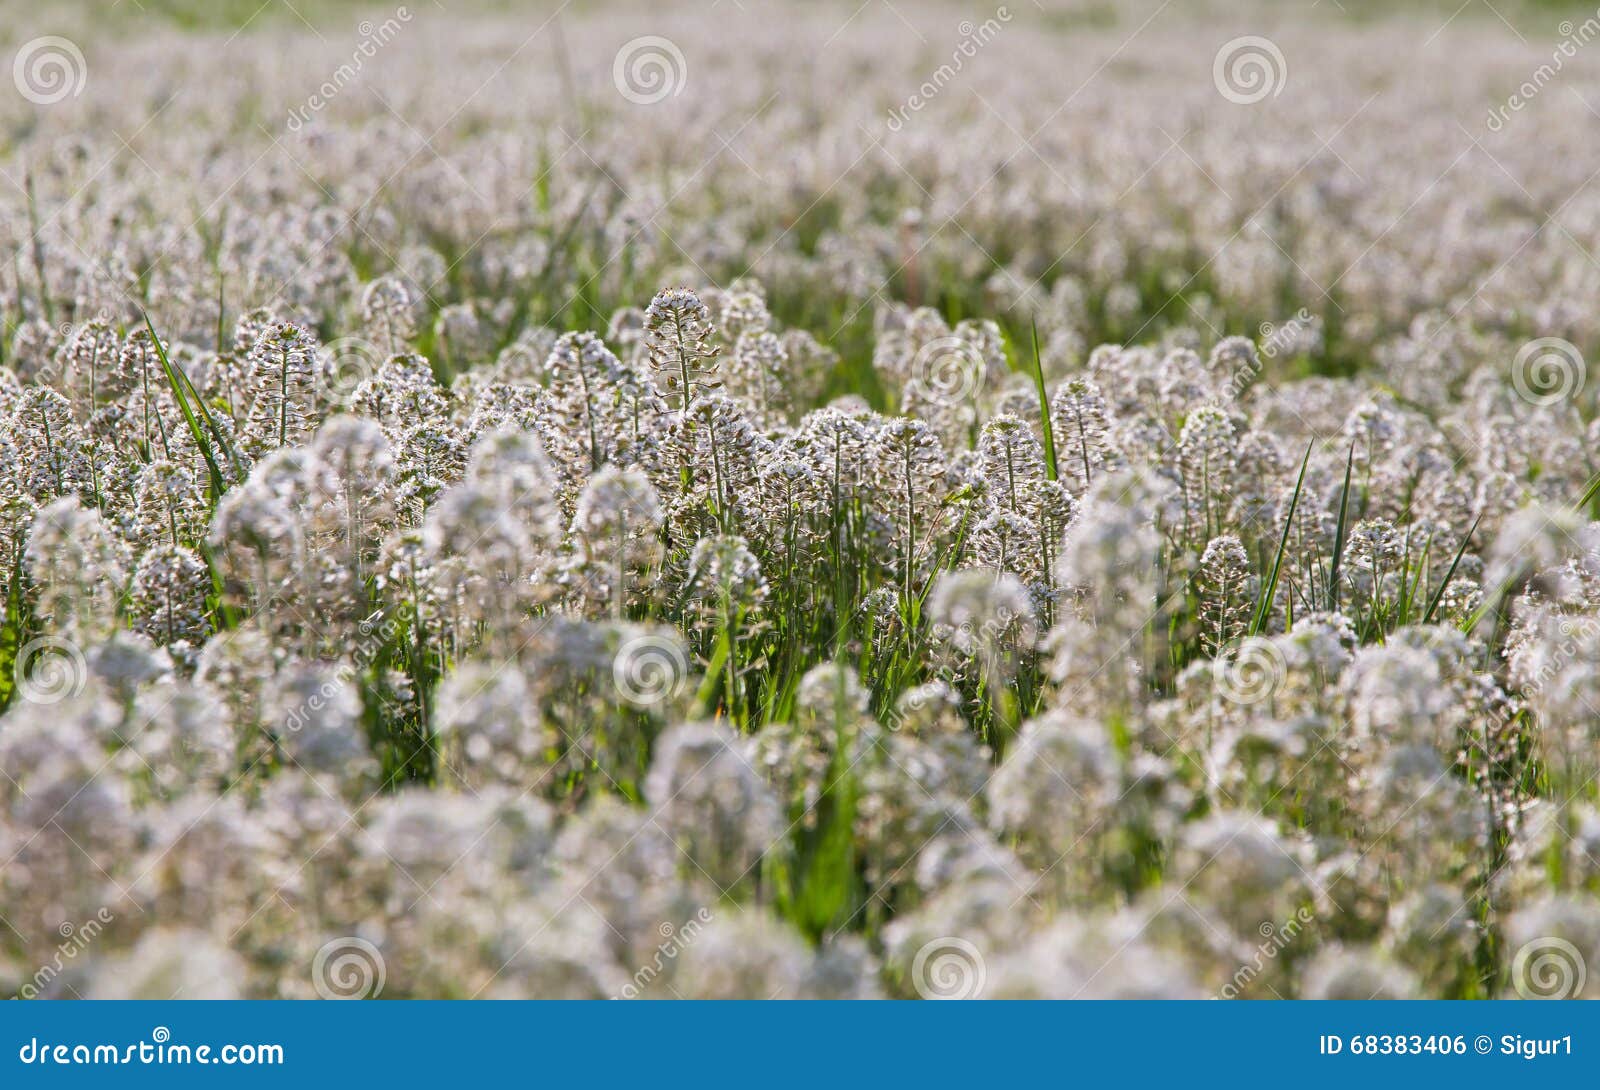 detail white flowers (thlaspi) in meadow